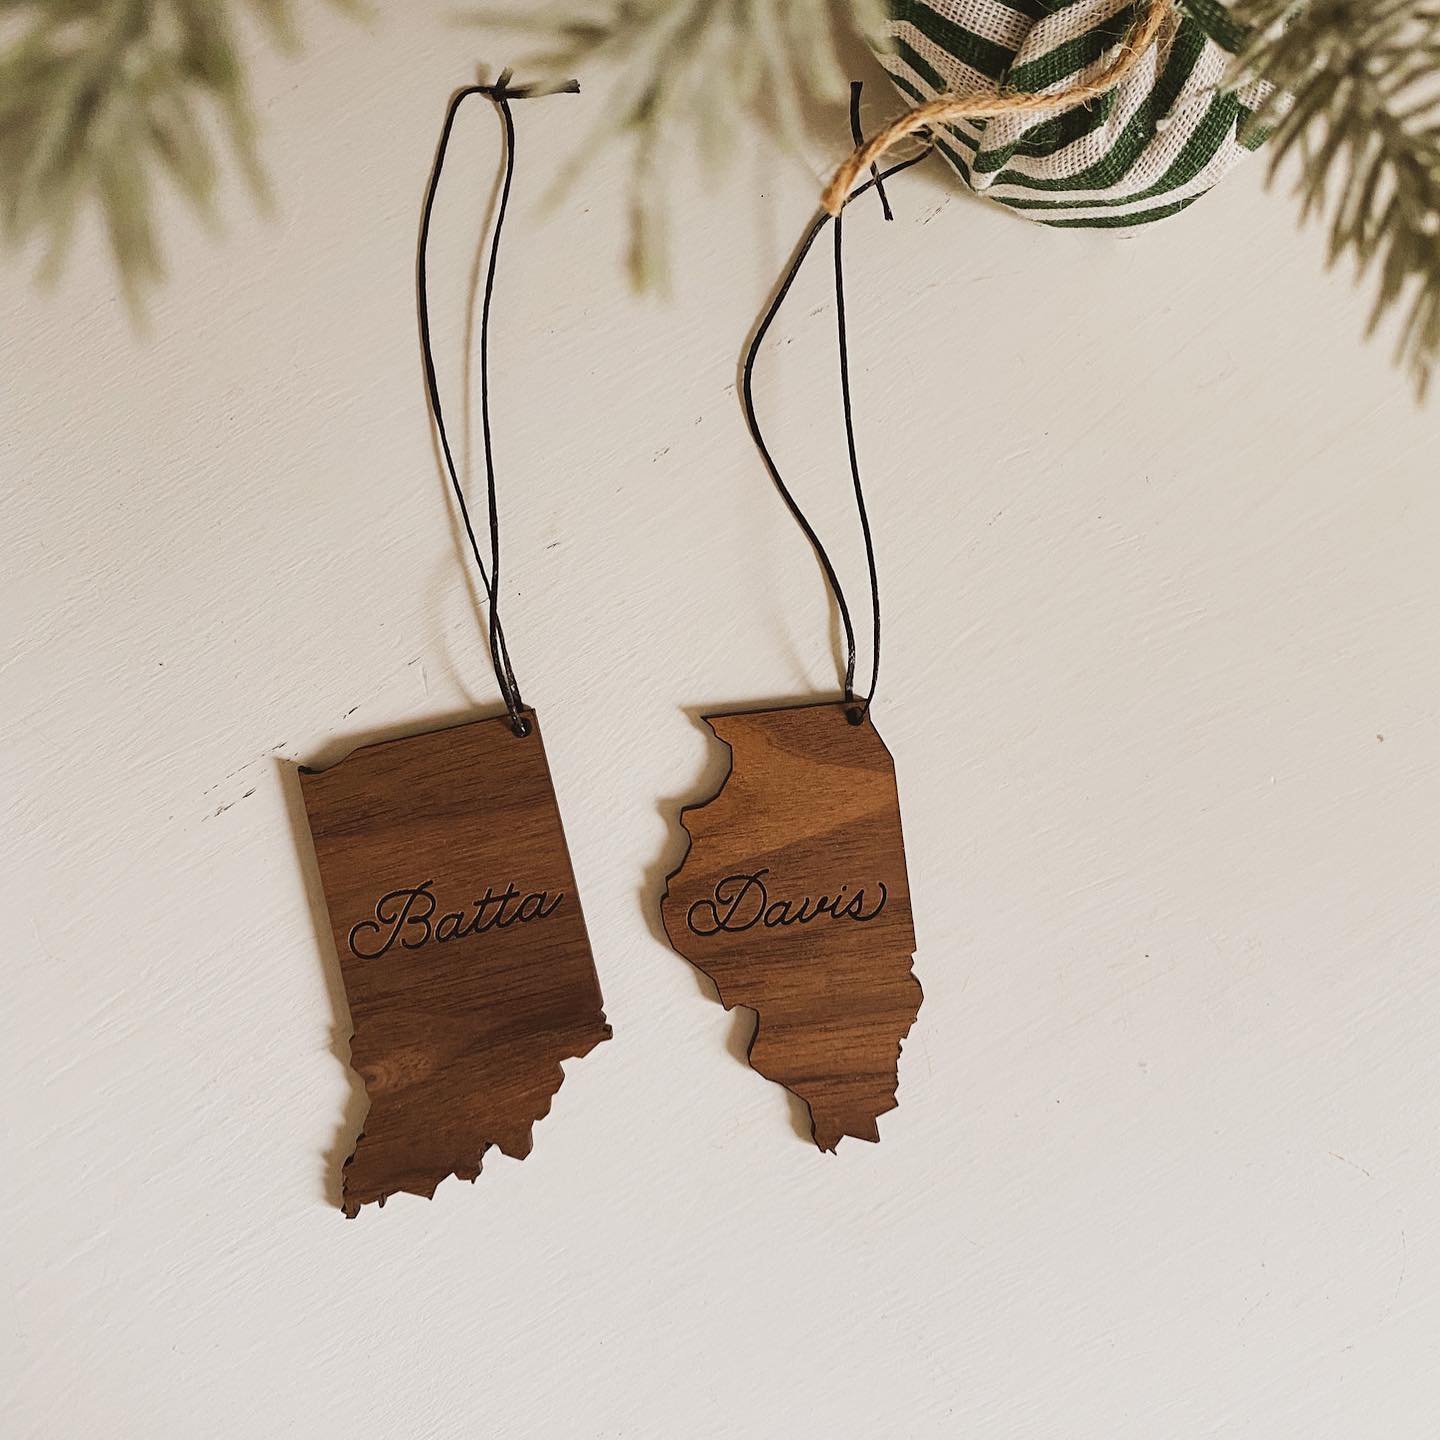 two ornaments made of wood shaped like the outline of indiana and illinois